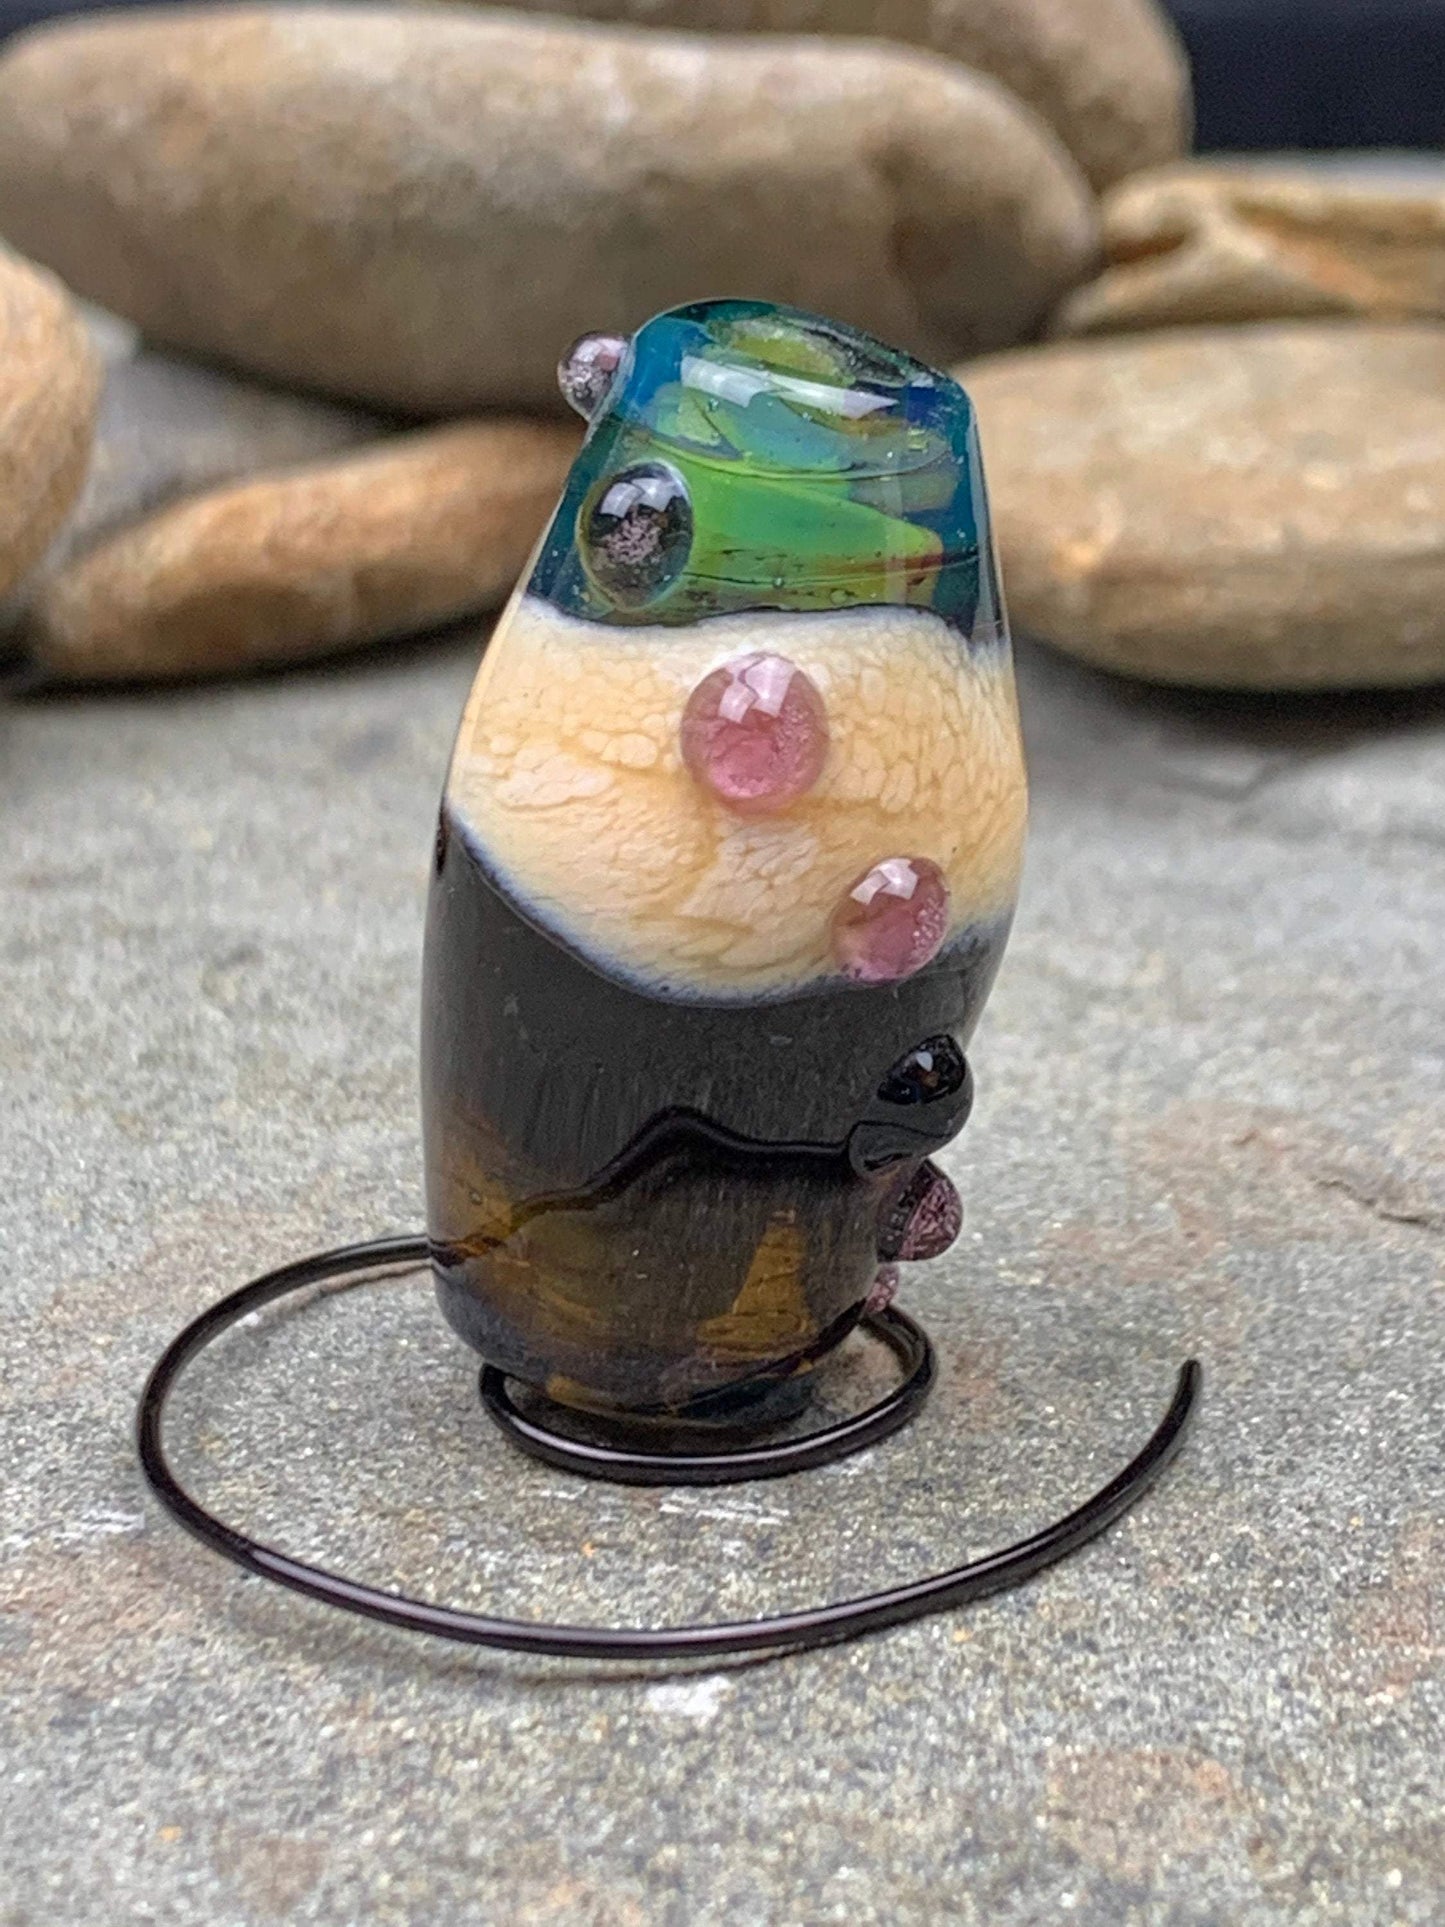 a handmade lampworked glass bead with pink dots on a teal, black and green background